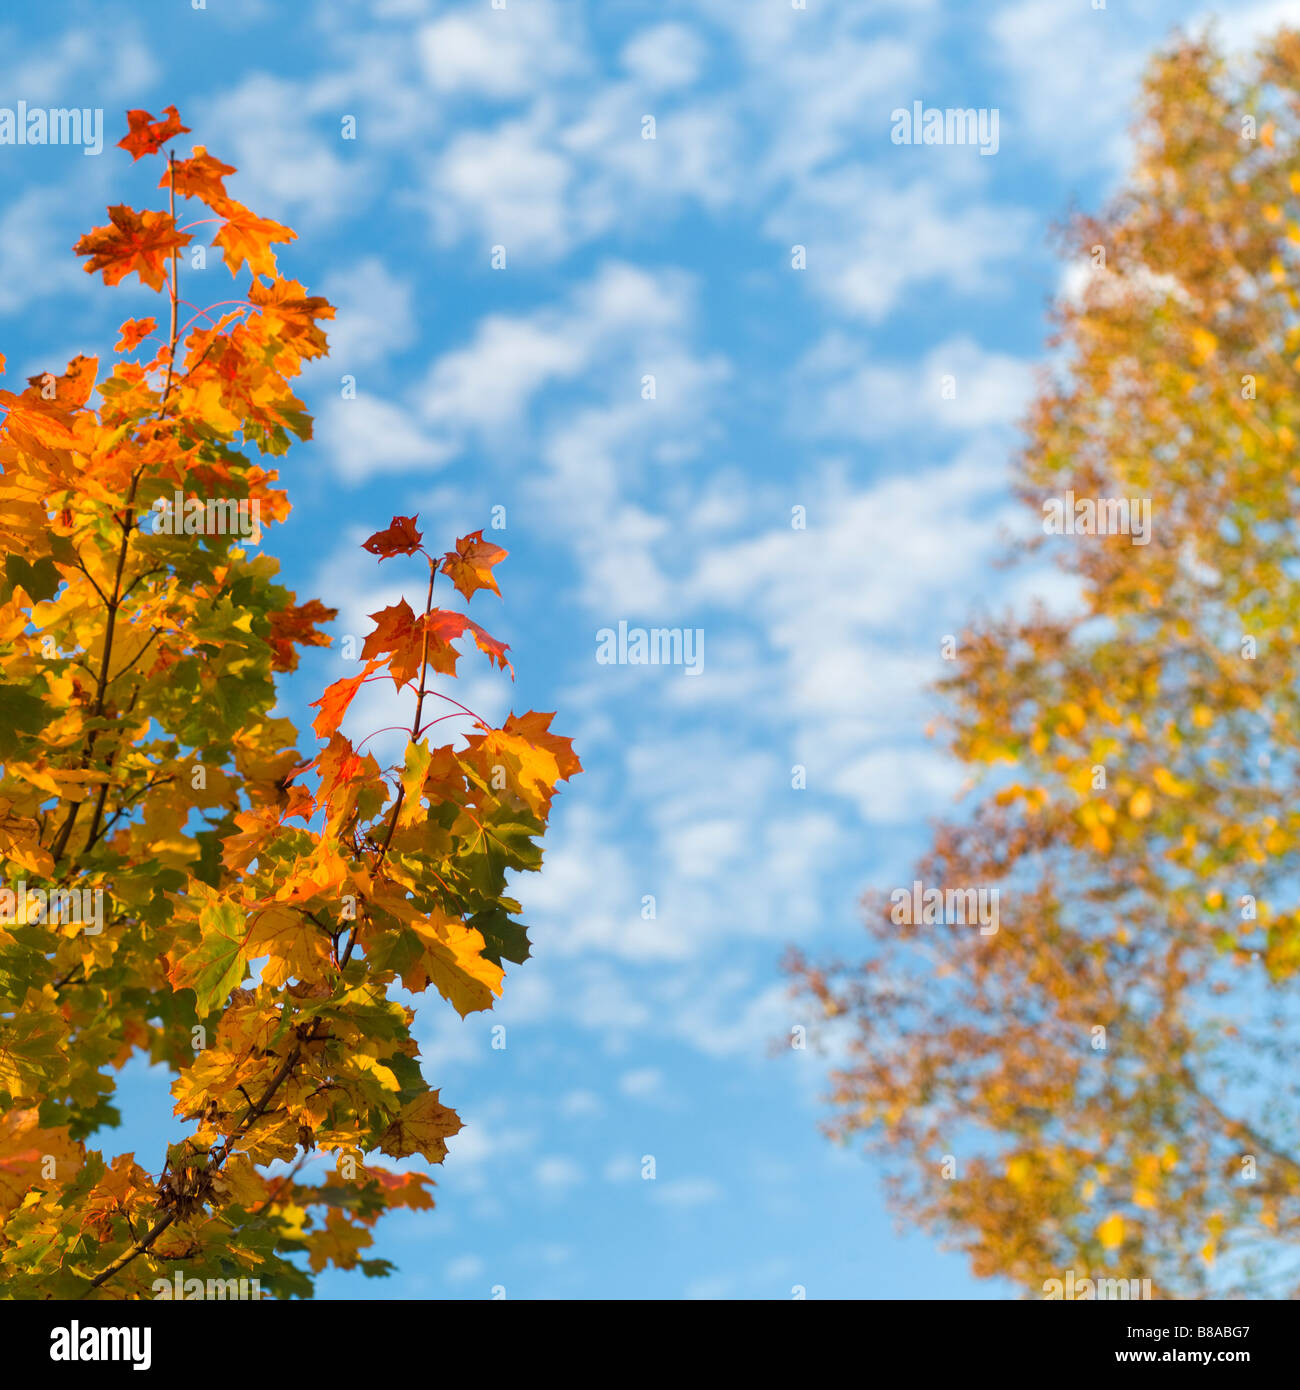 Birch and mapletree with blue sky Stock Photo